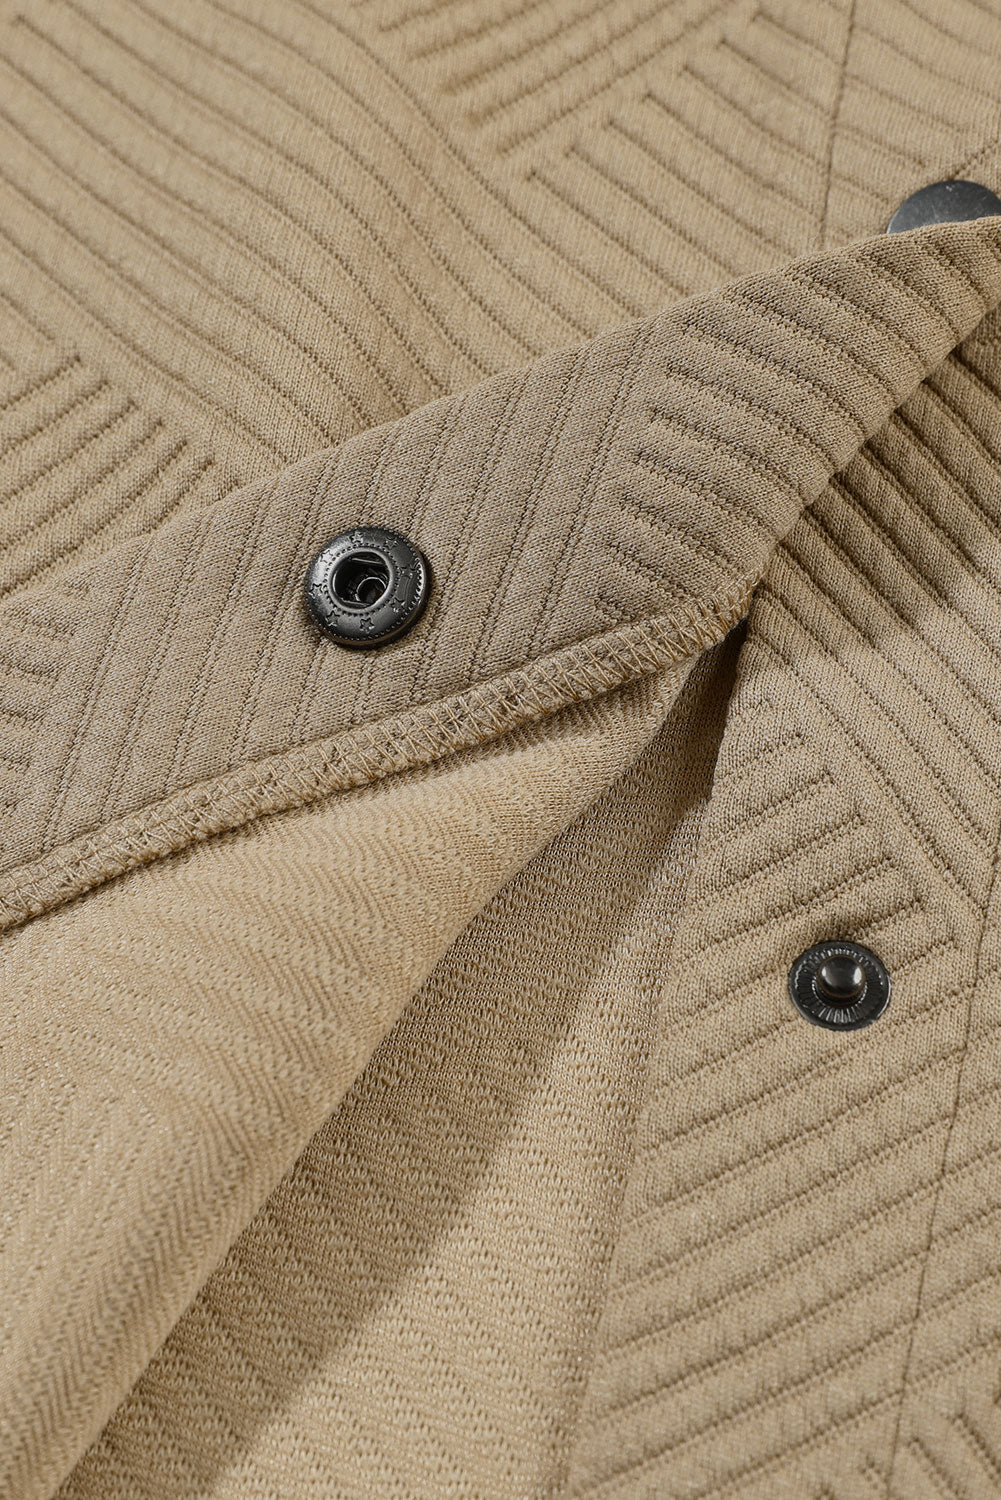 Khaki Solid Textured Flap Pocket Buttoned Shacket